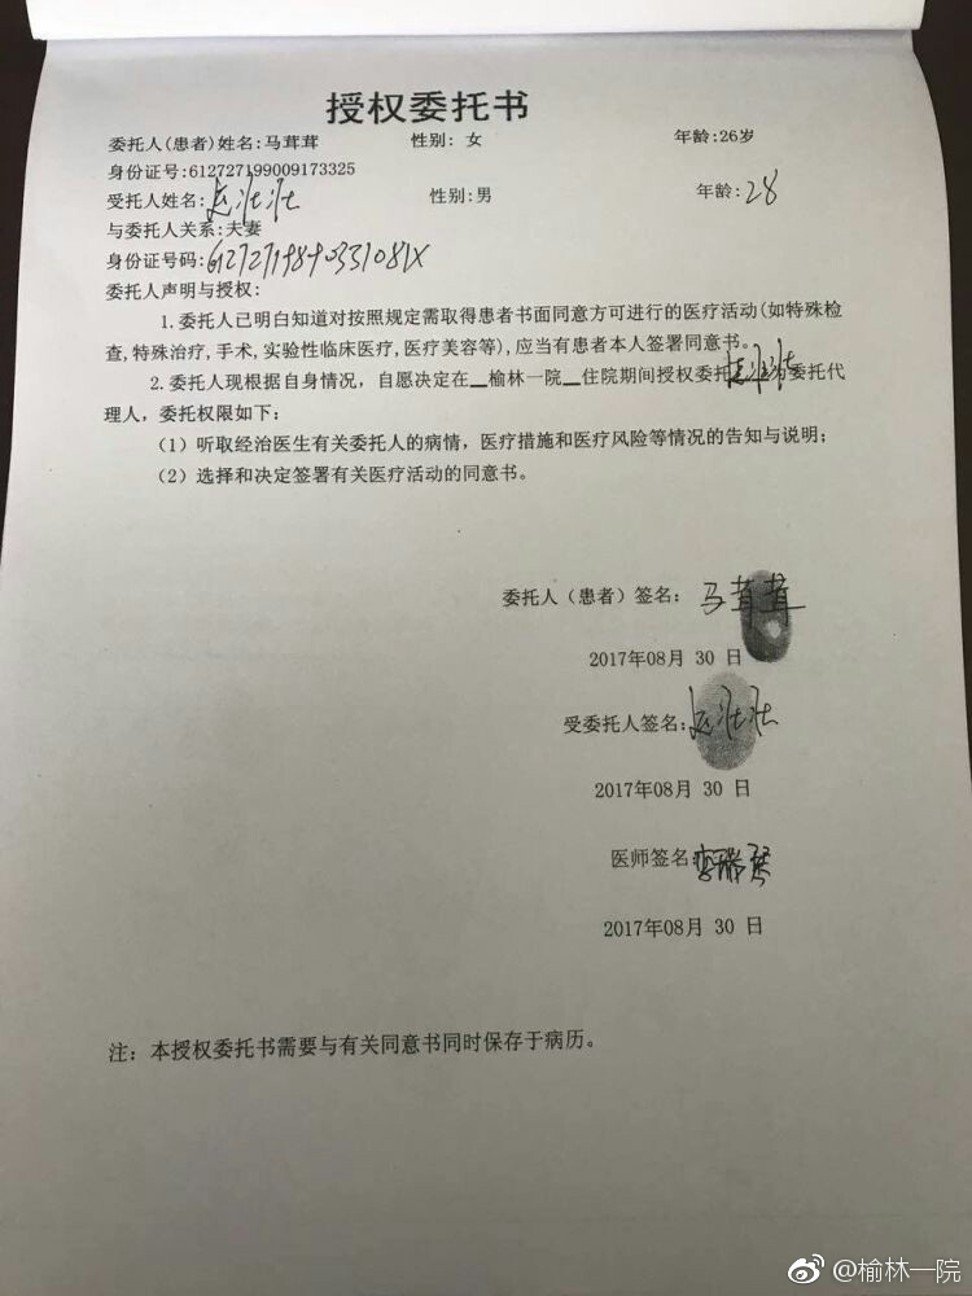 The hospital published this “informed consent” declaration showing that Ma and her husband had agreed to go ahead with a natural delivery despite knowing the risks. Photo: Handout